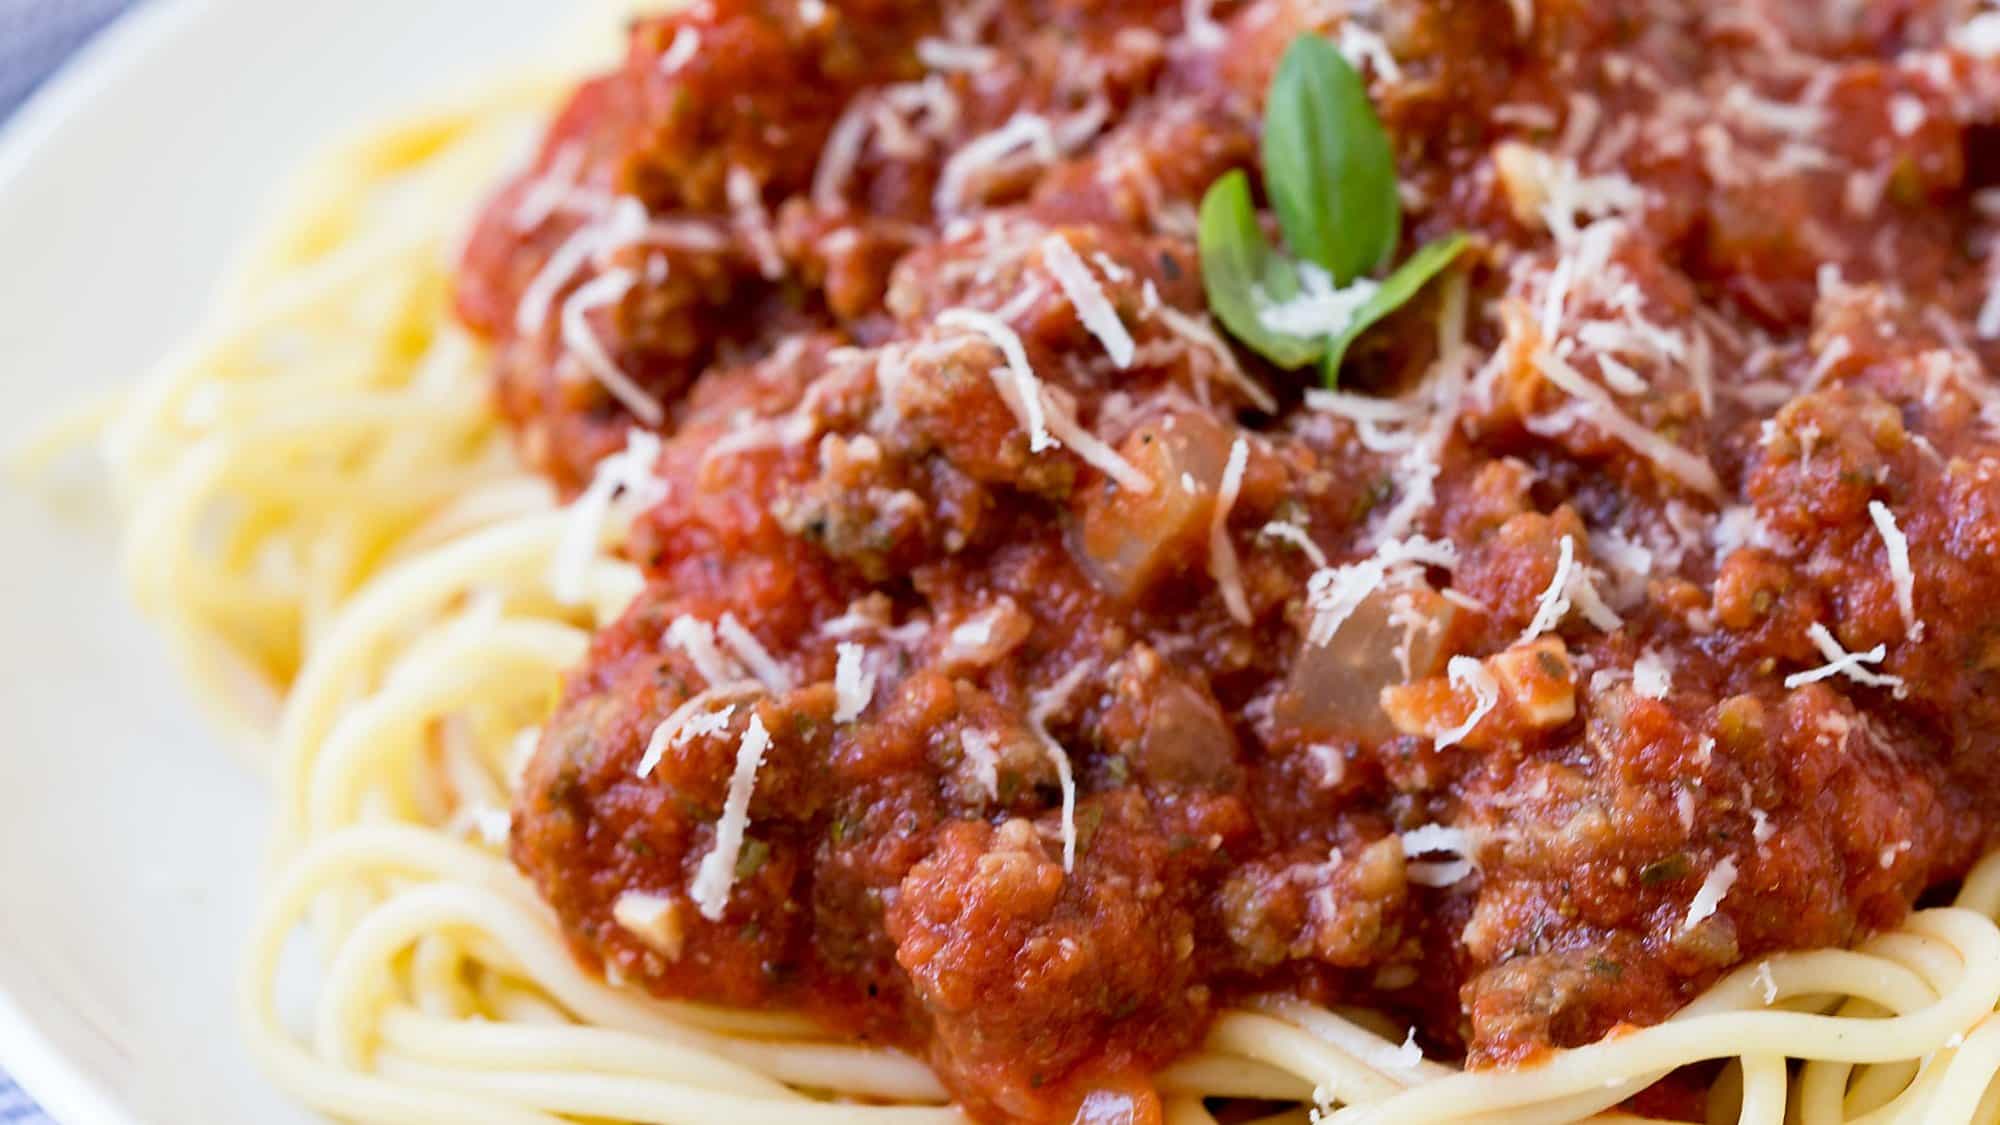 Crock Pot Spaghetti Sauce is an easy dinner recipe to make busy weeknights easier! I keep the ingredients on hand to make when I'll be short on time!